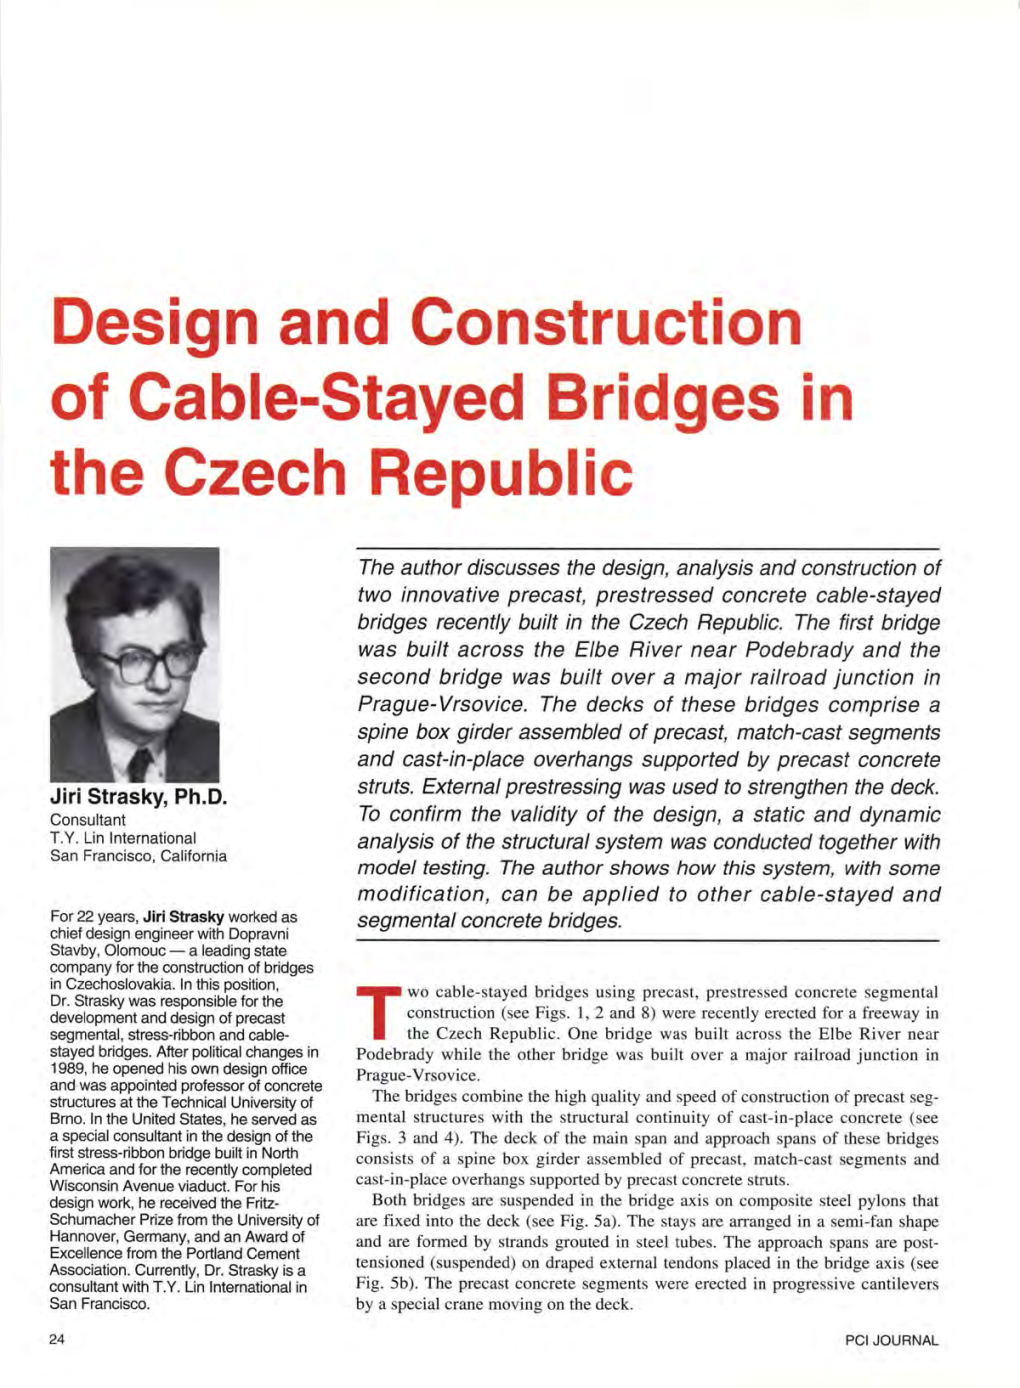 Design and Construction of Cable-Stayed Bridges in the Czech Republic